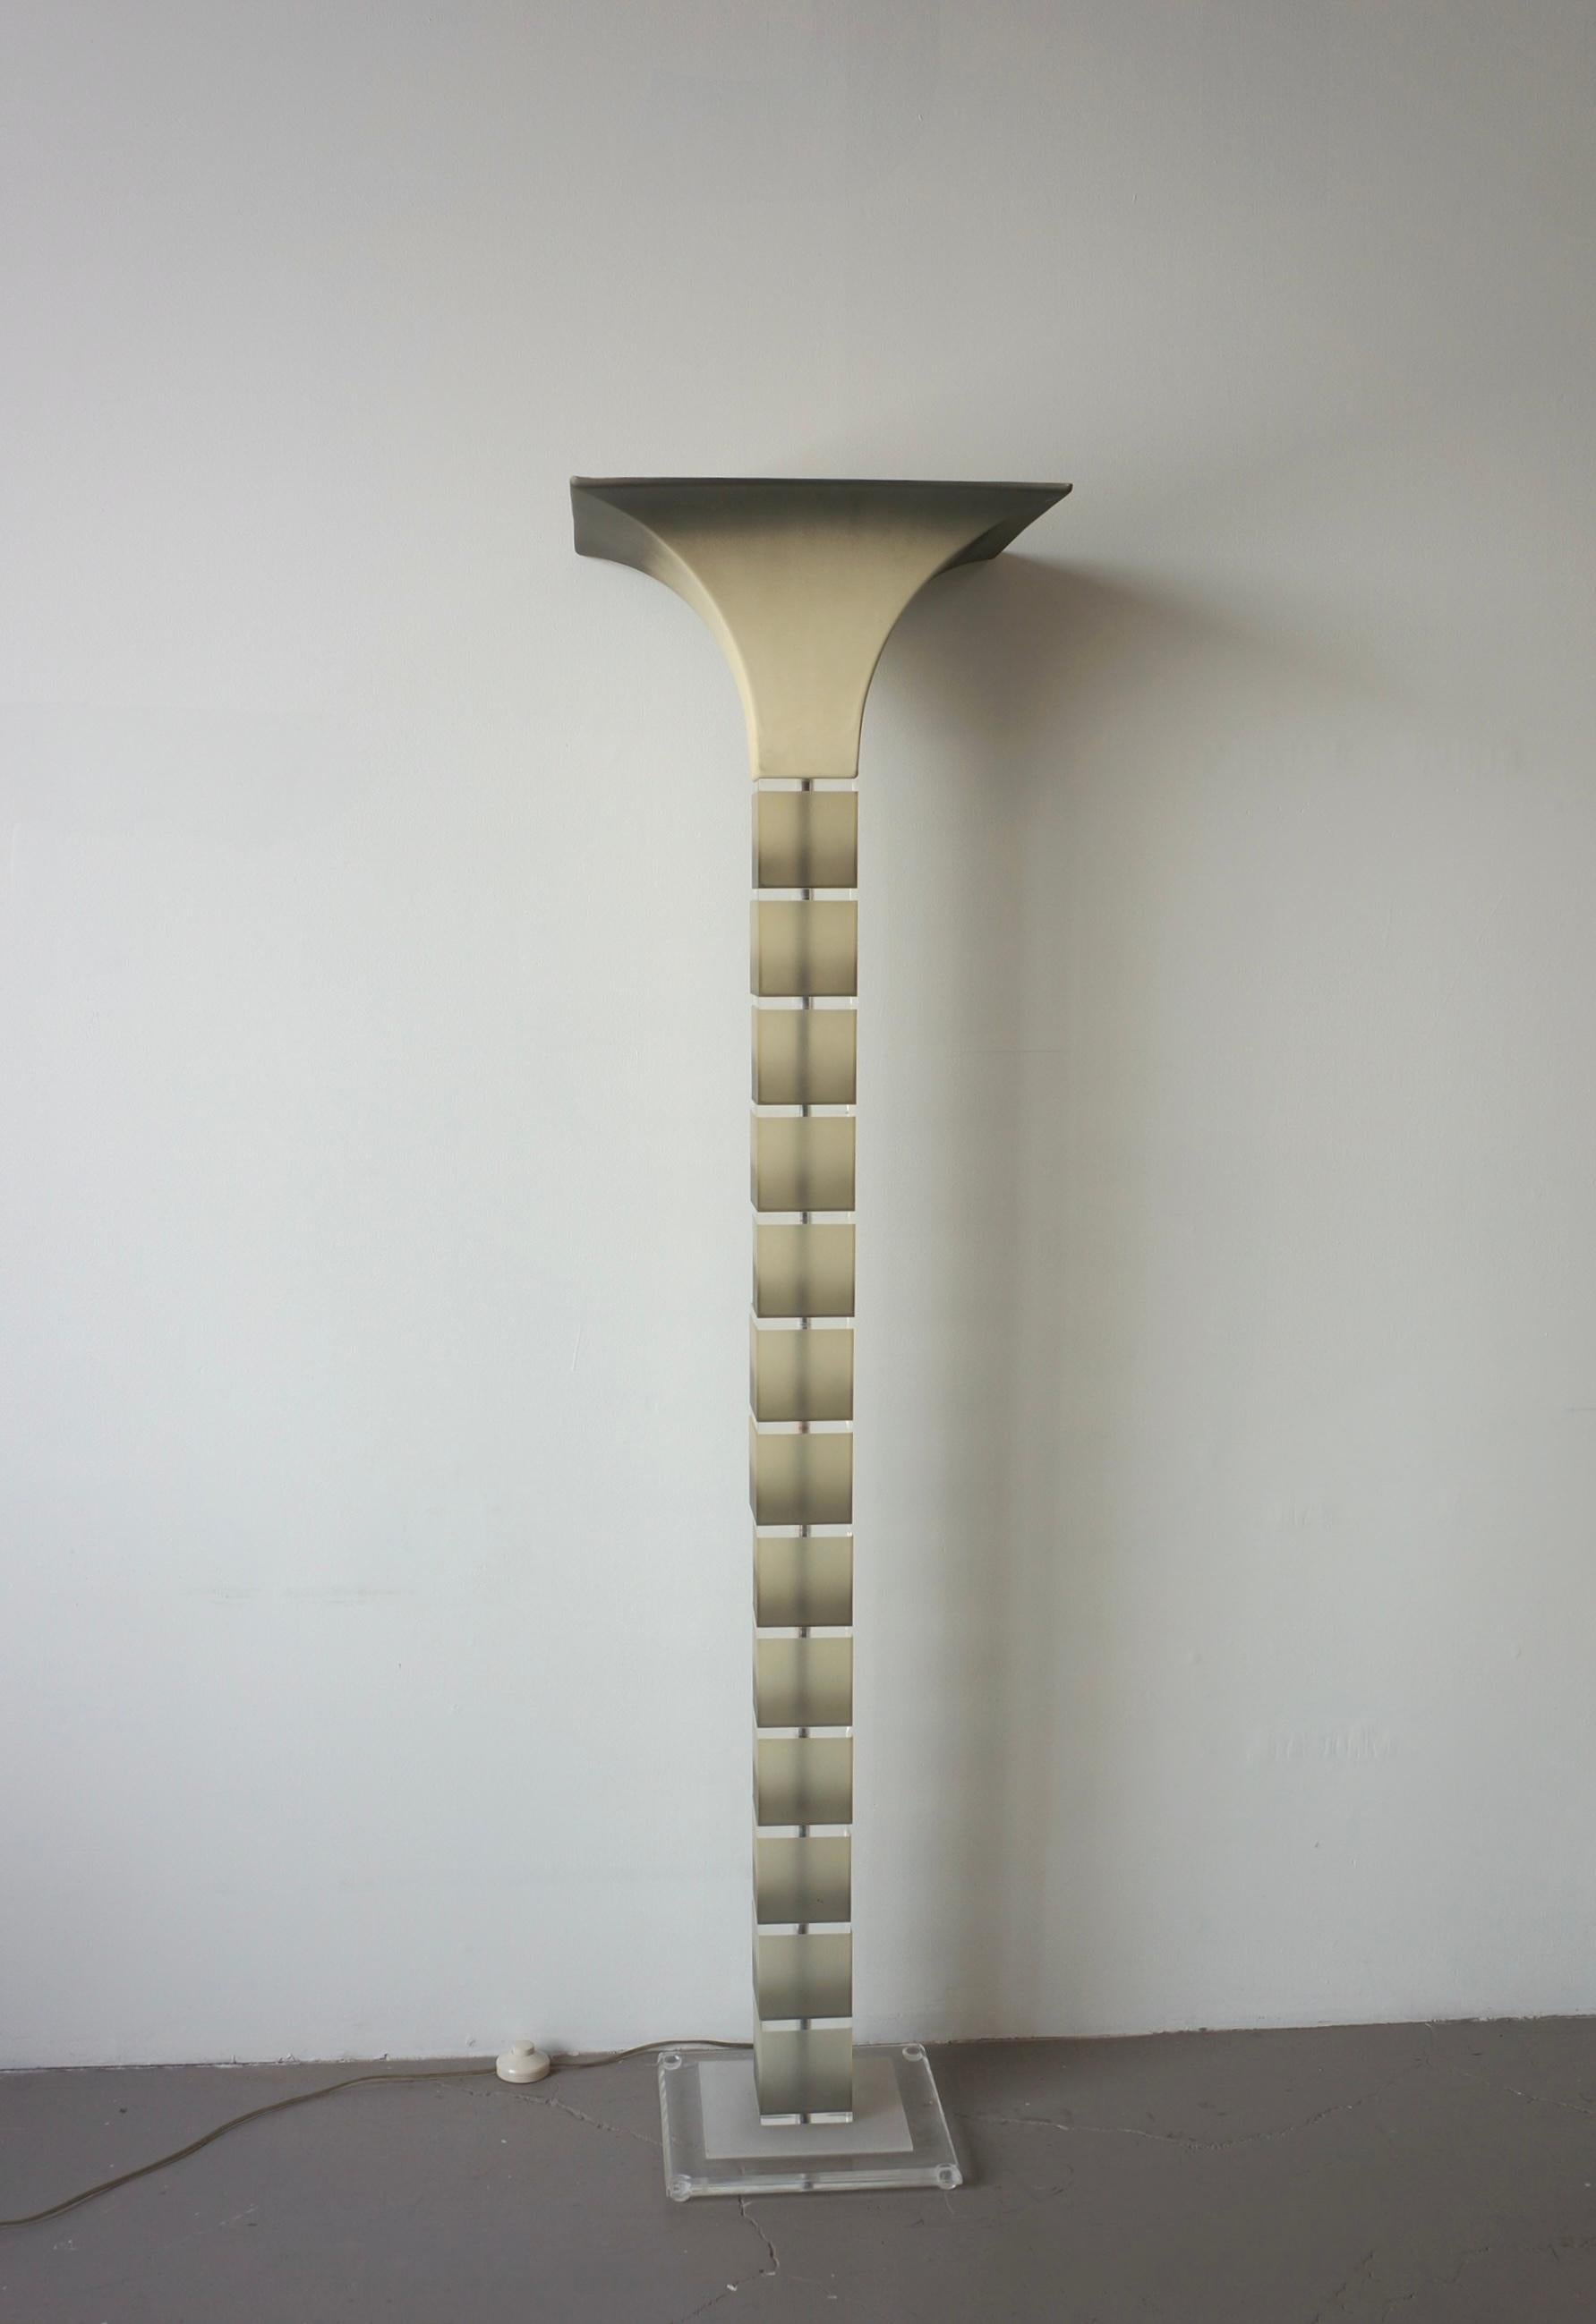 Stunning Stacked floor lamp in clear lucite and grey ombré acrylic made in the 1980s. This elegant design is in the style of Roger Rougier. The acrylic and lucite stacks can be turned and adjusted to different angles. This lucite floor lamp gives a